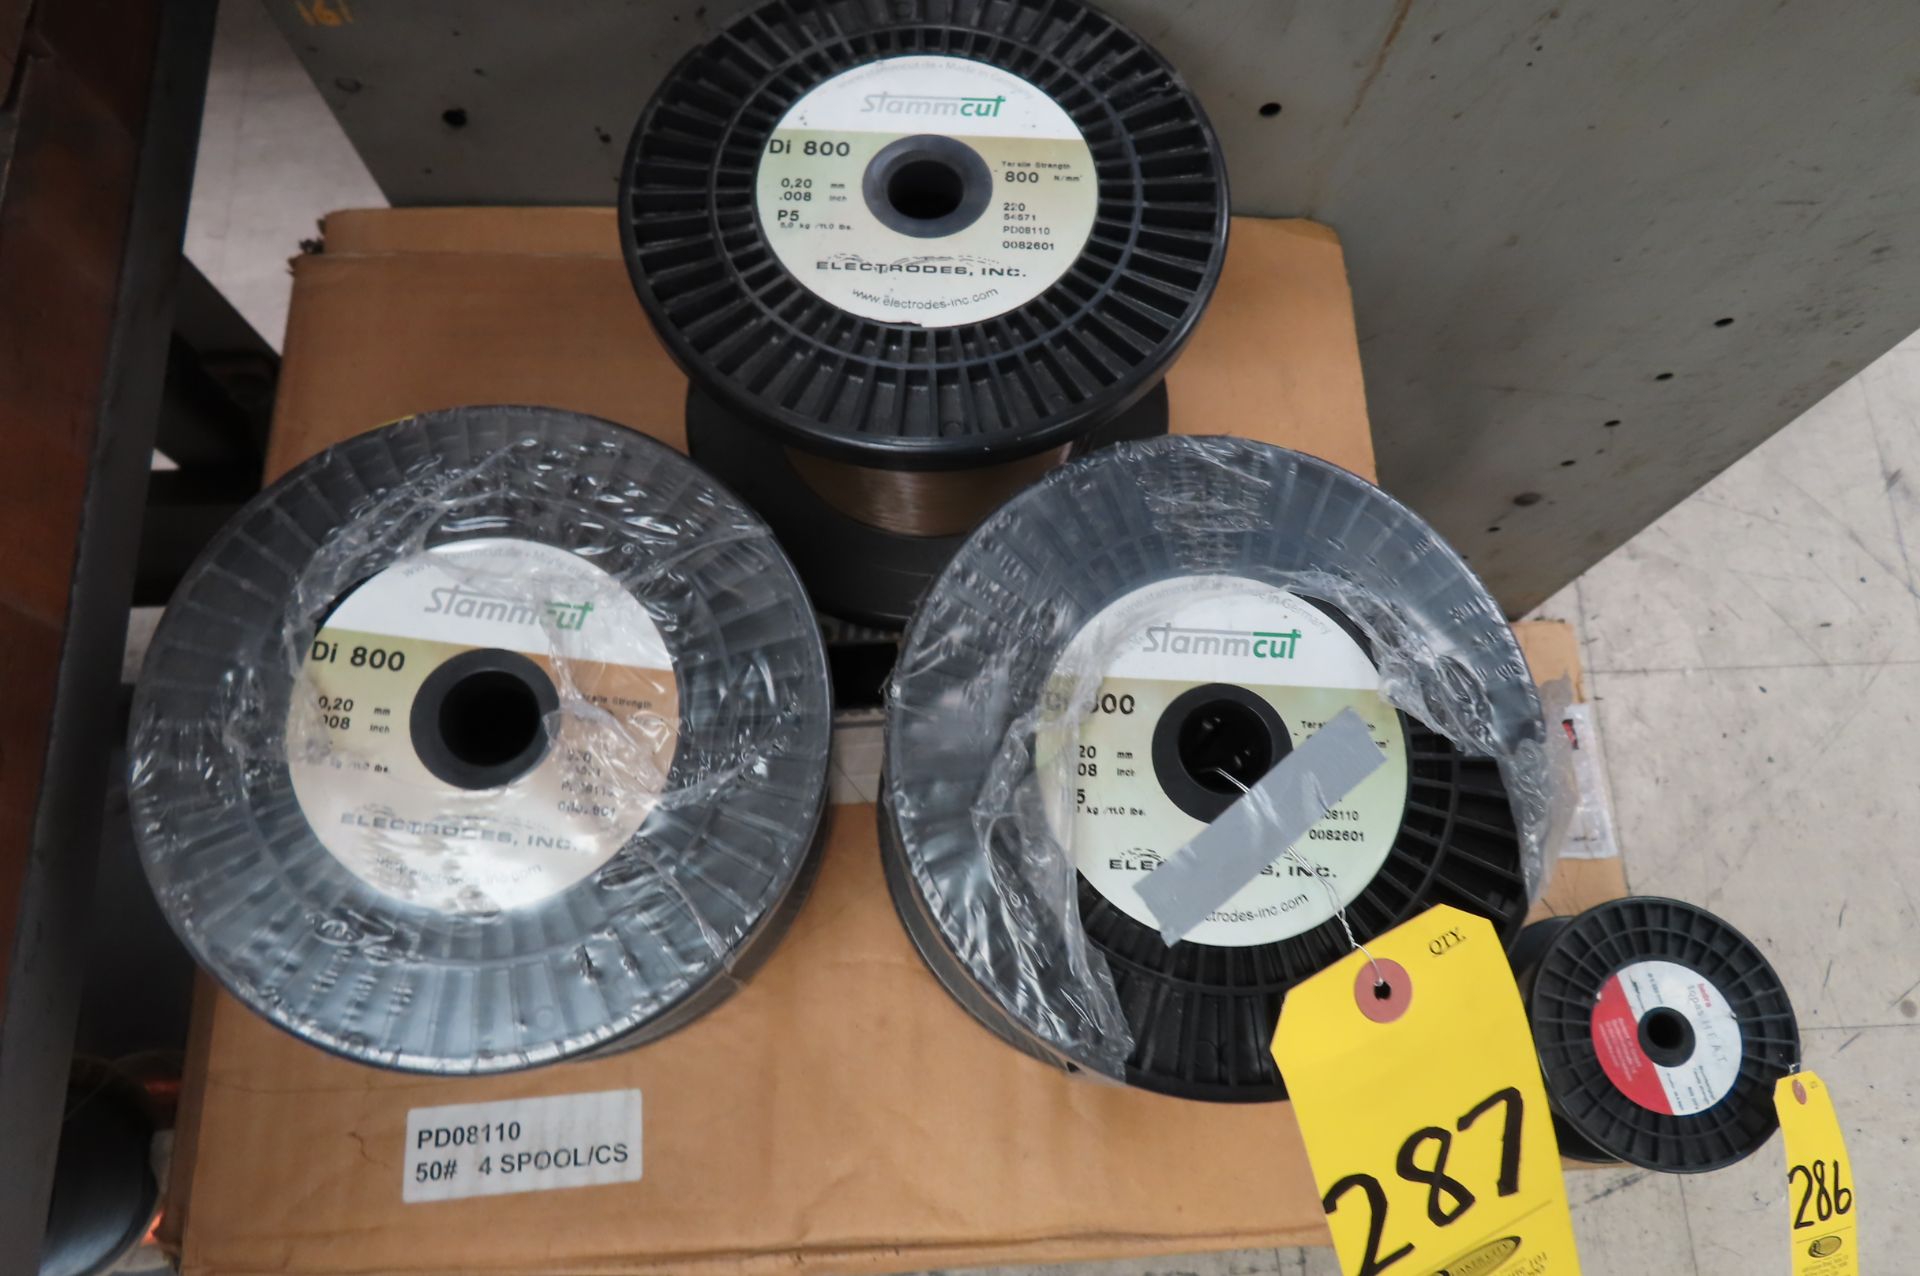 (18) STAMMCUT DI800 0.20 MM WIRE REELS - Image 2 of 3